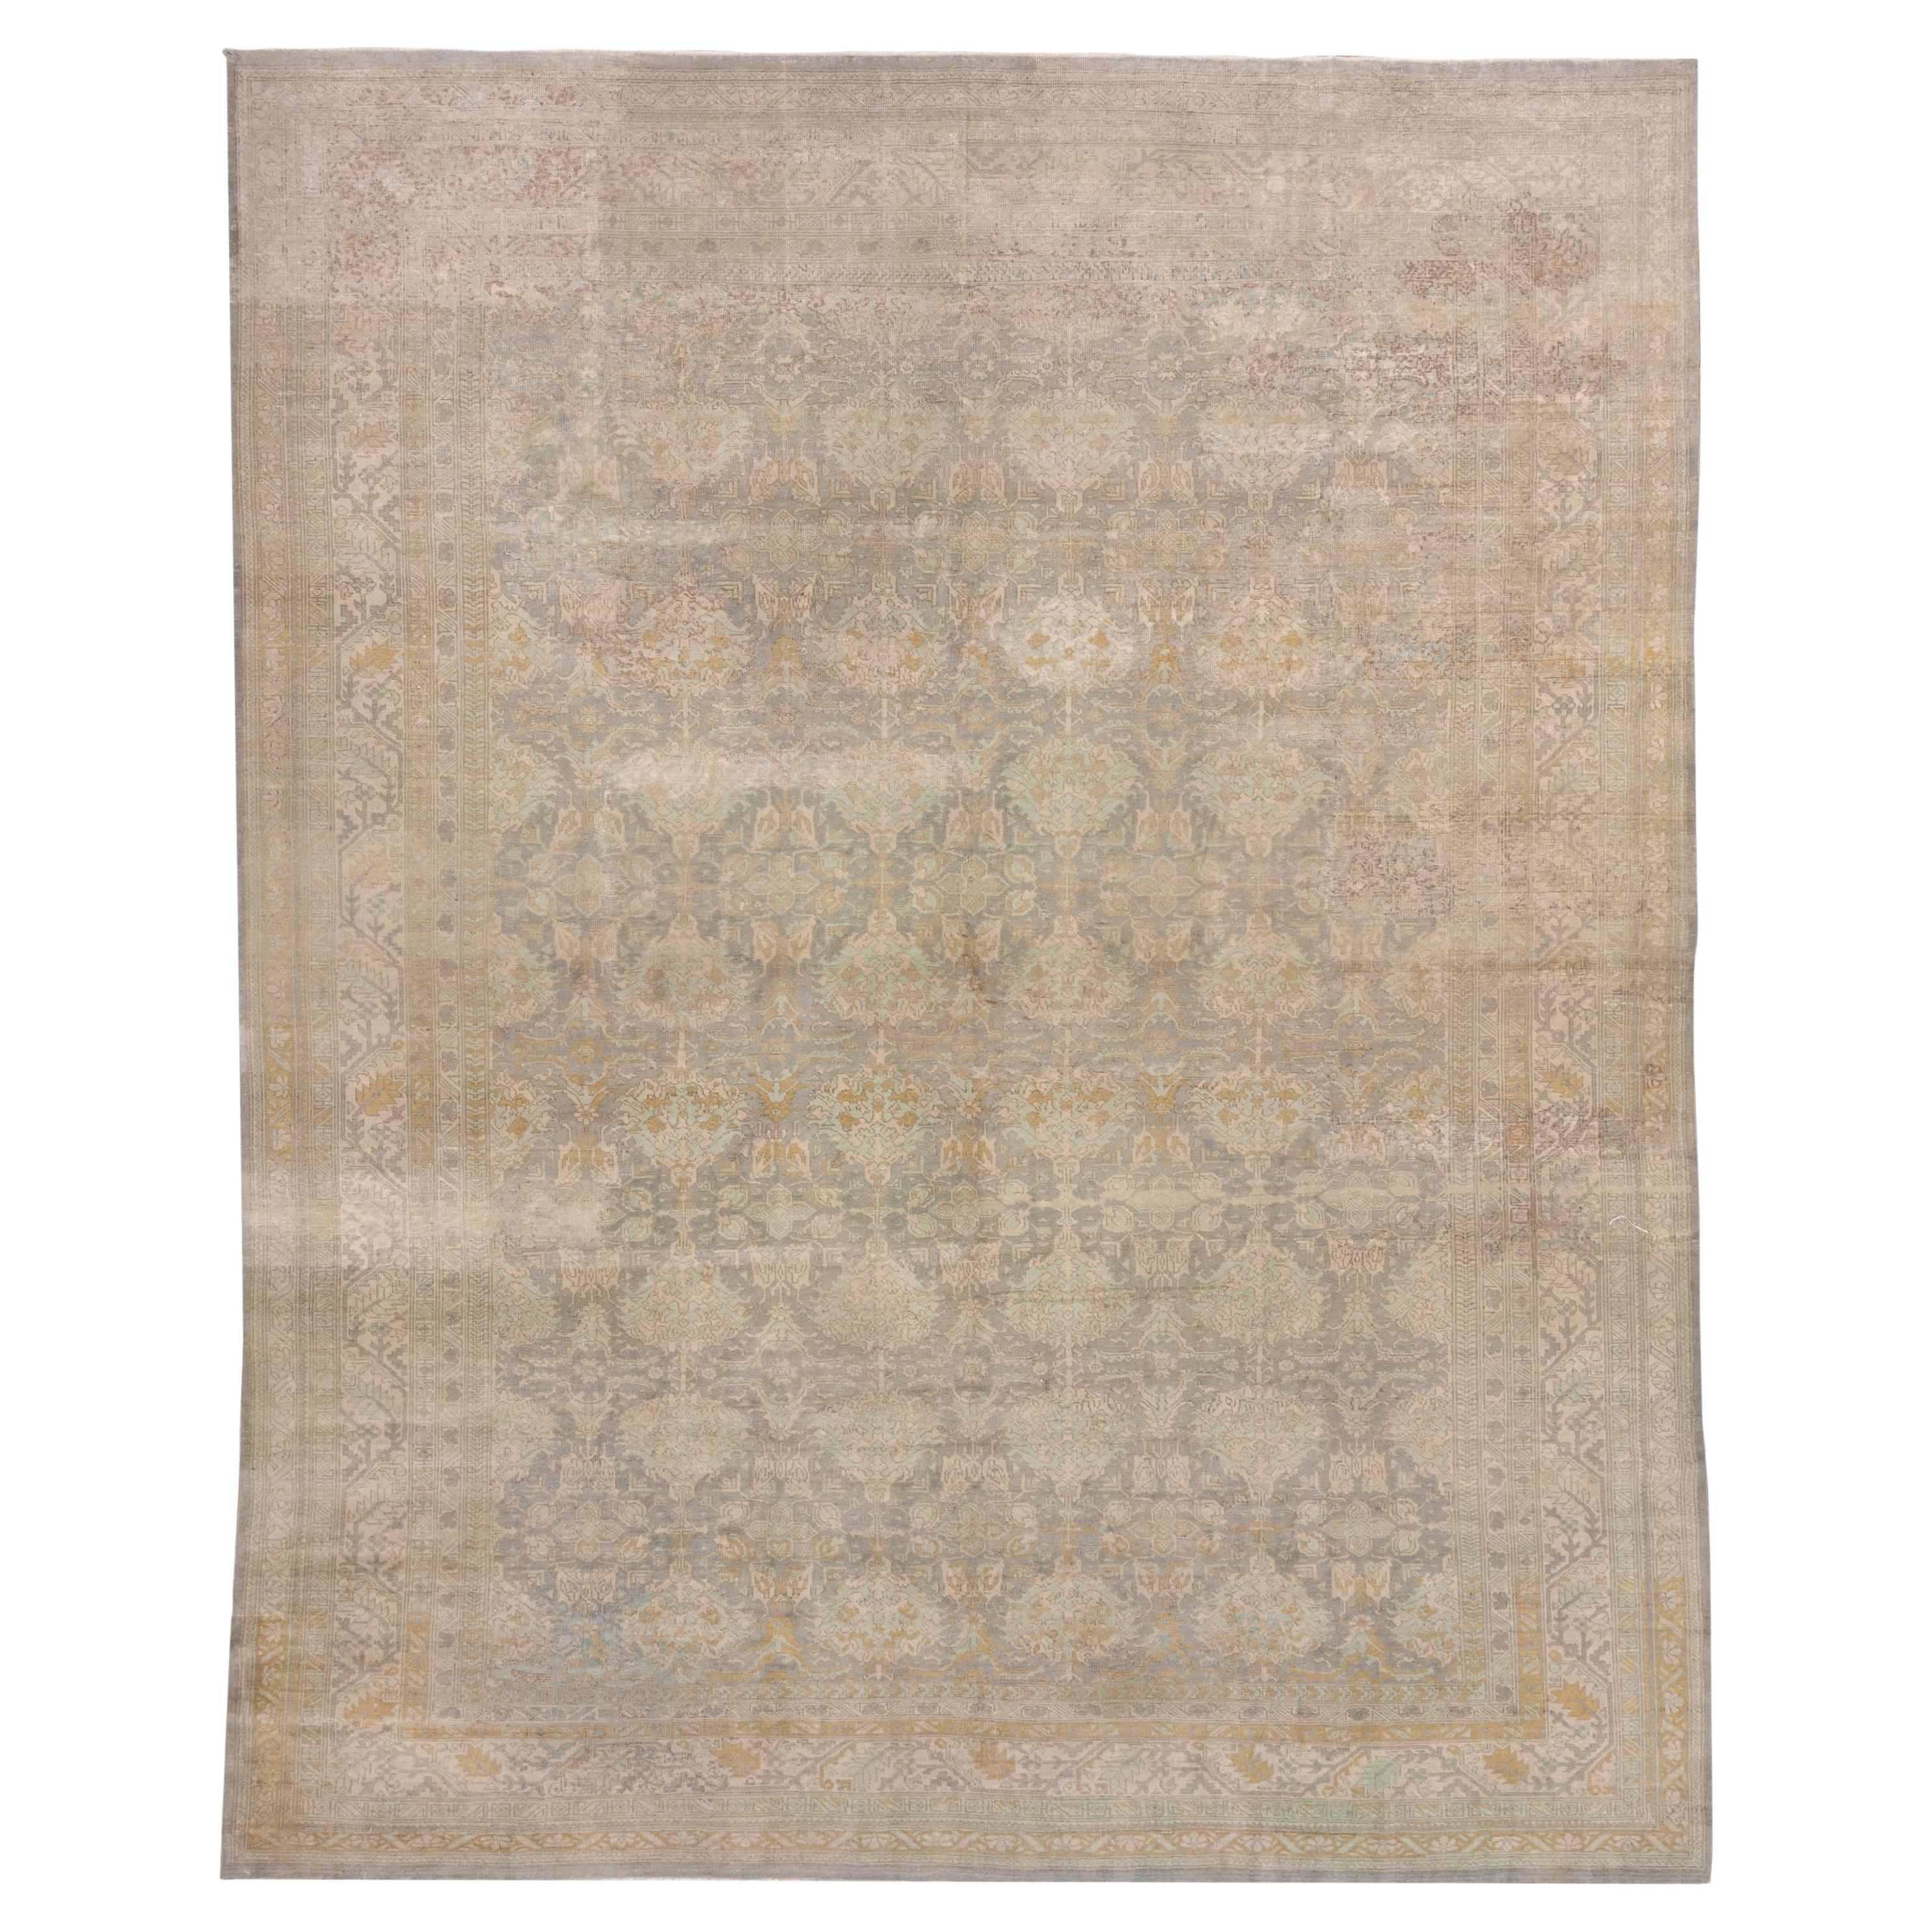 Room Sized Antique Oushak Rug, Gray & Seafoam Allover Field, Lightly Distressed